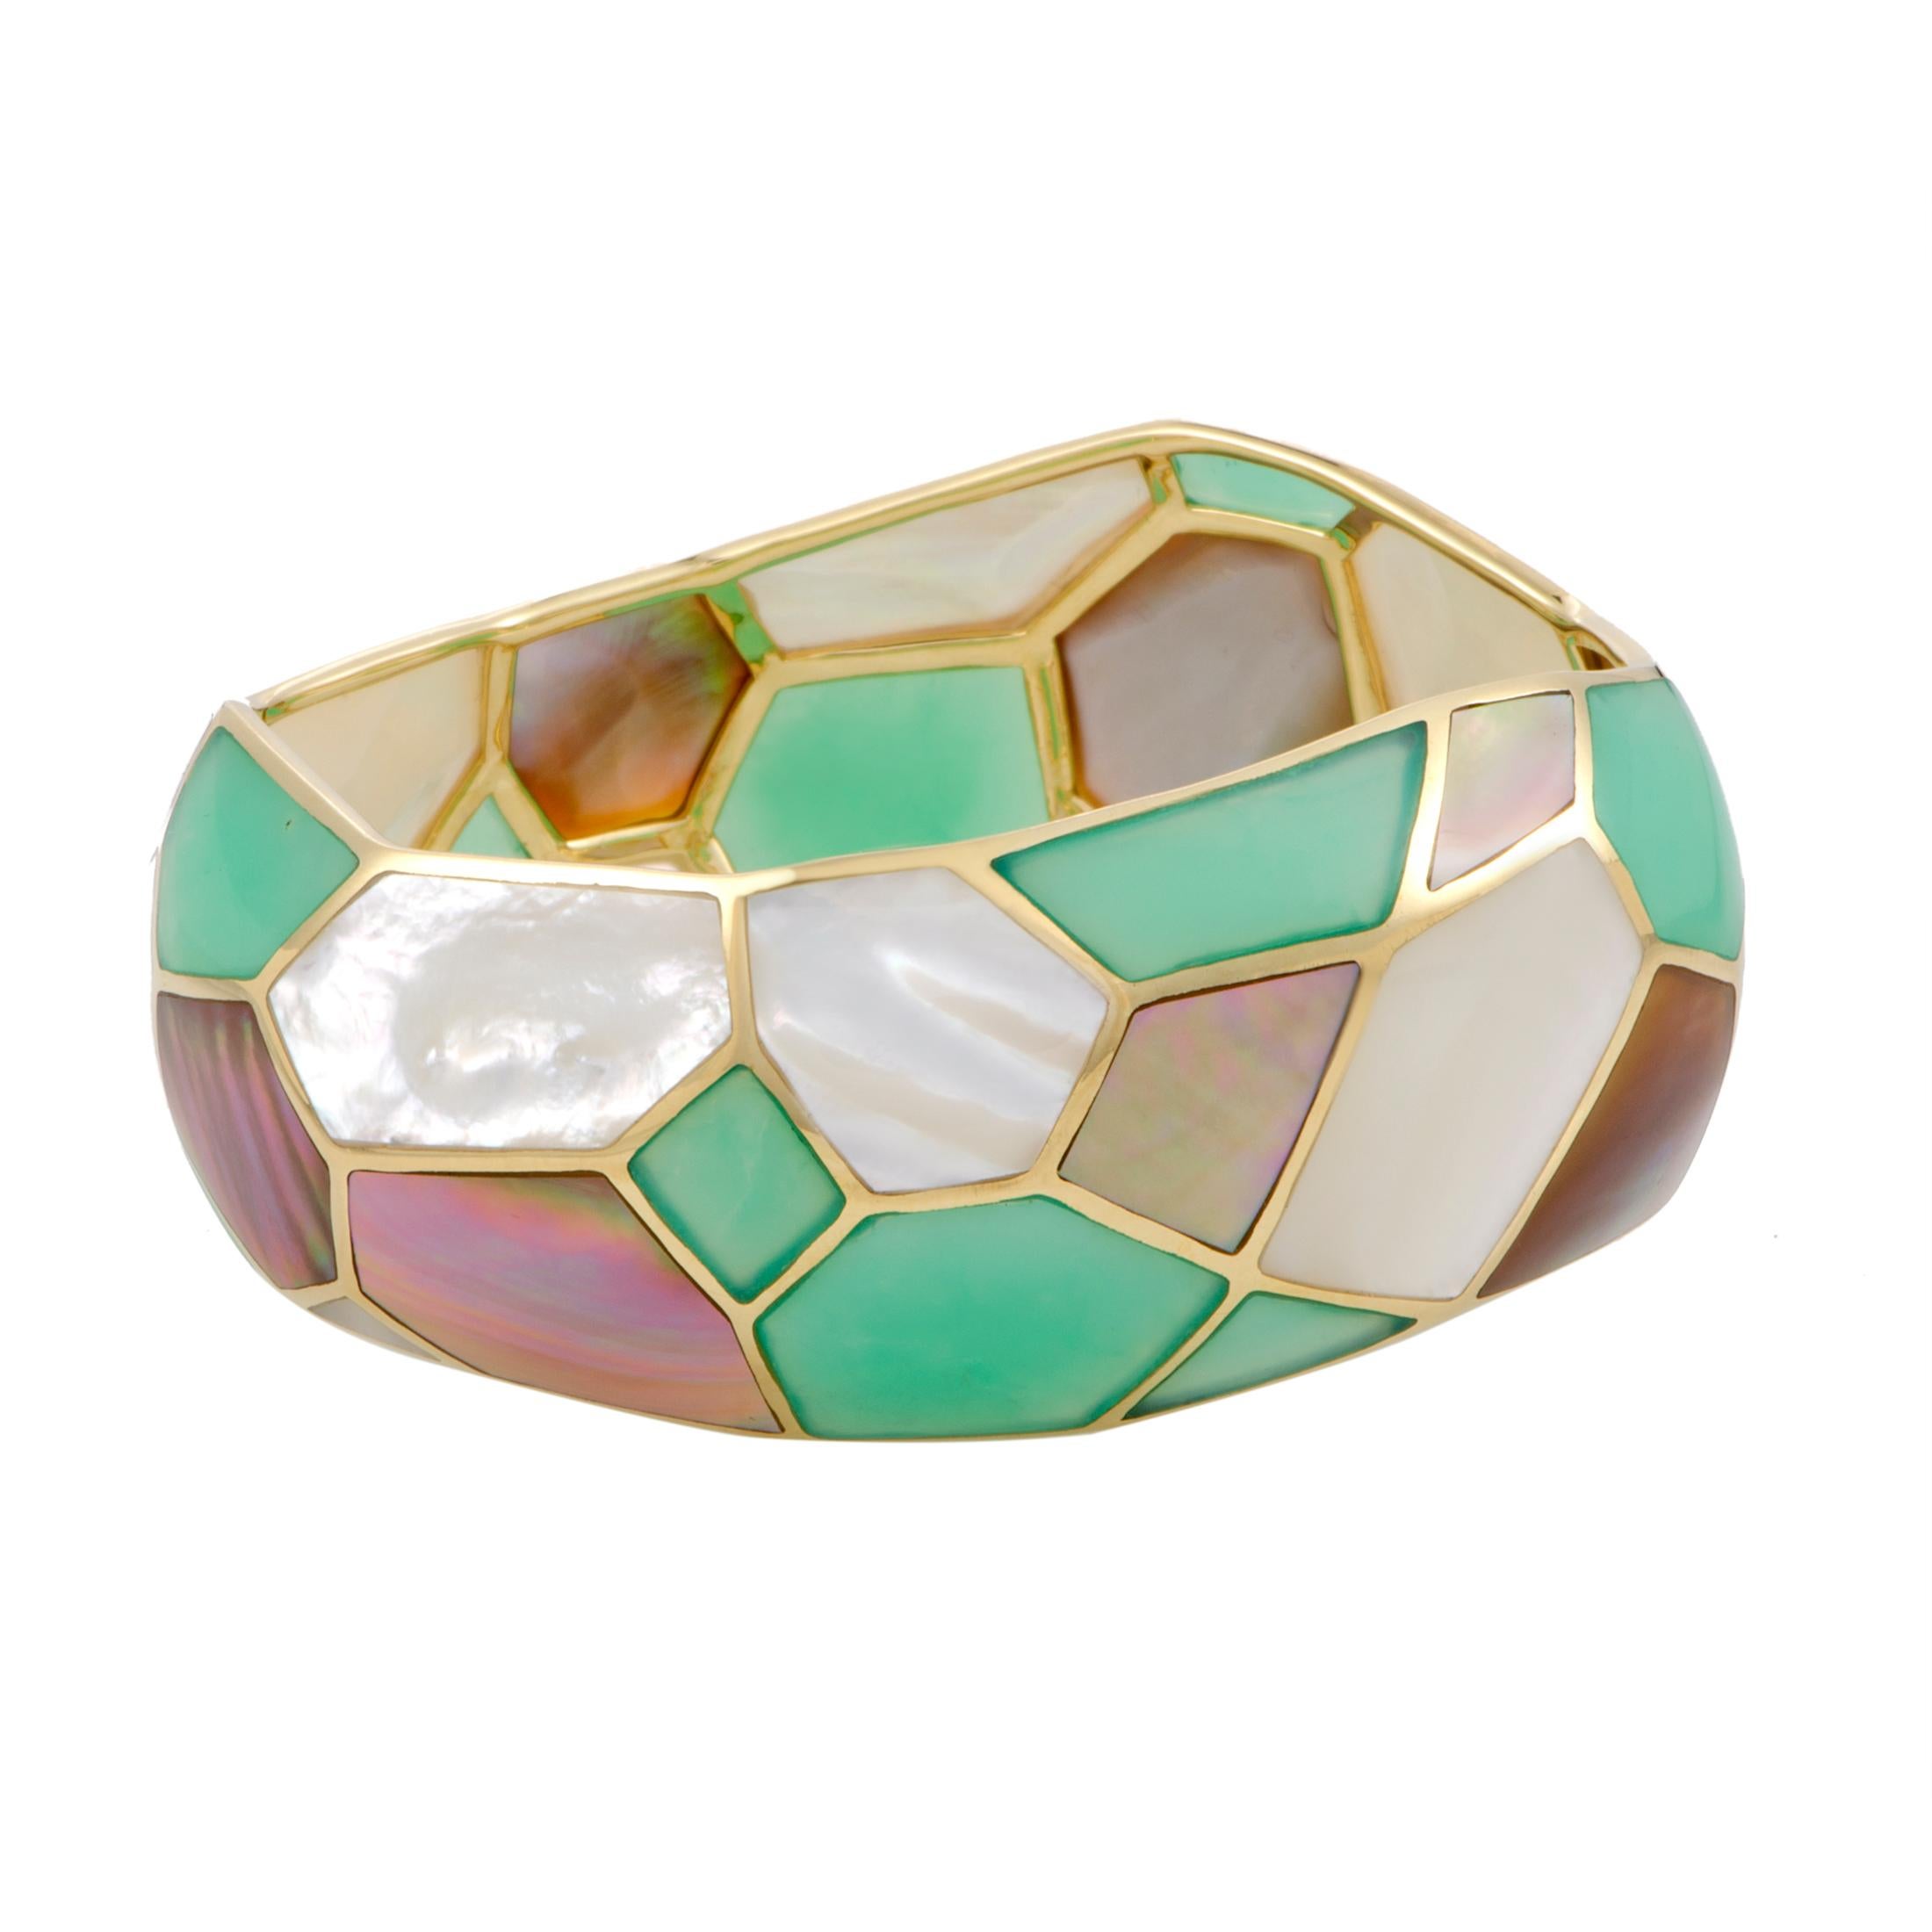 Polished Rock Candy 18 Karat Yellow Gold Mother-of-Pearl and Turquoise Bangle